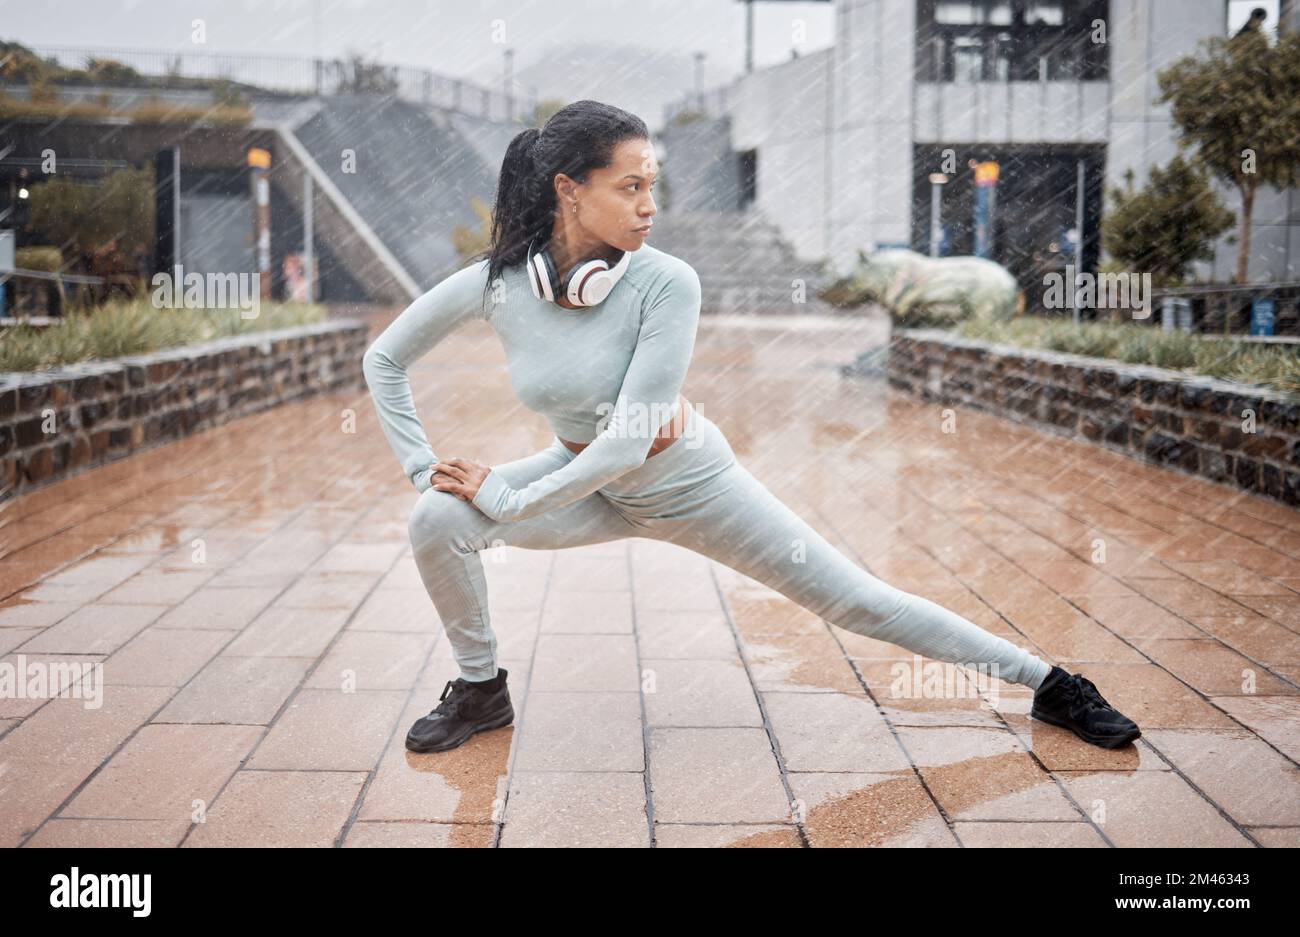 Rain, outdoor fitness and runner stretching for winter exercise, health training or start workout. Warm up, water drop and black woman focus with Stock Photo